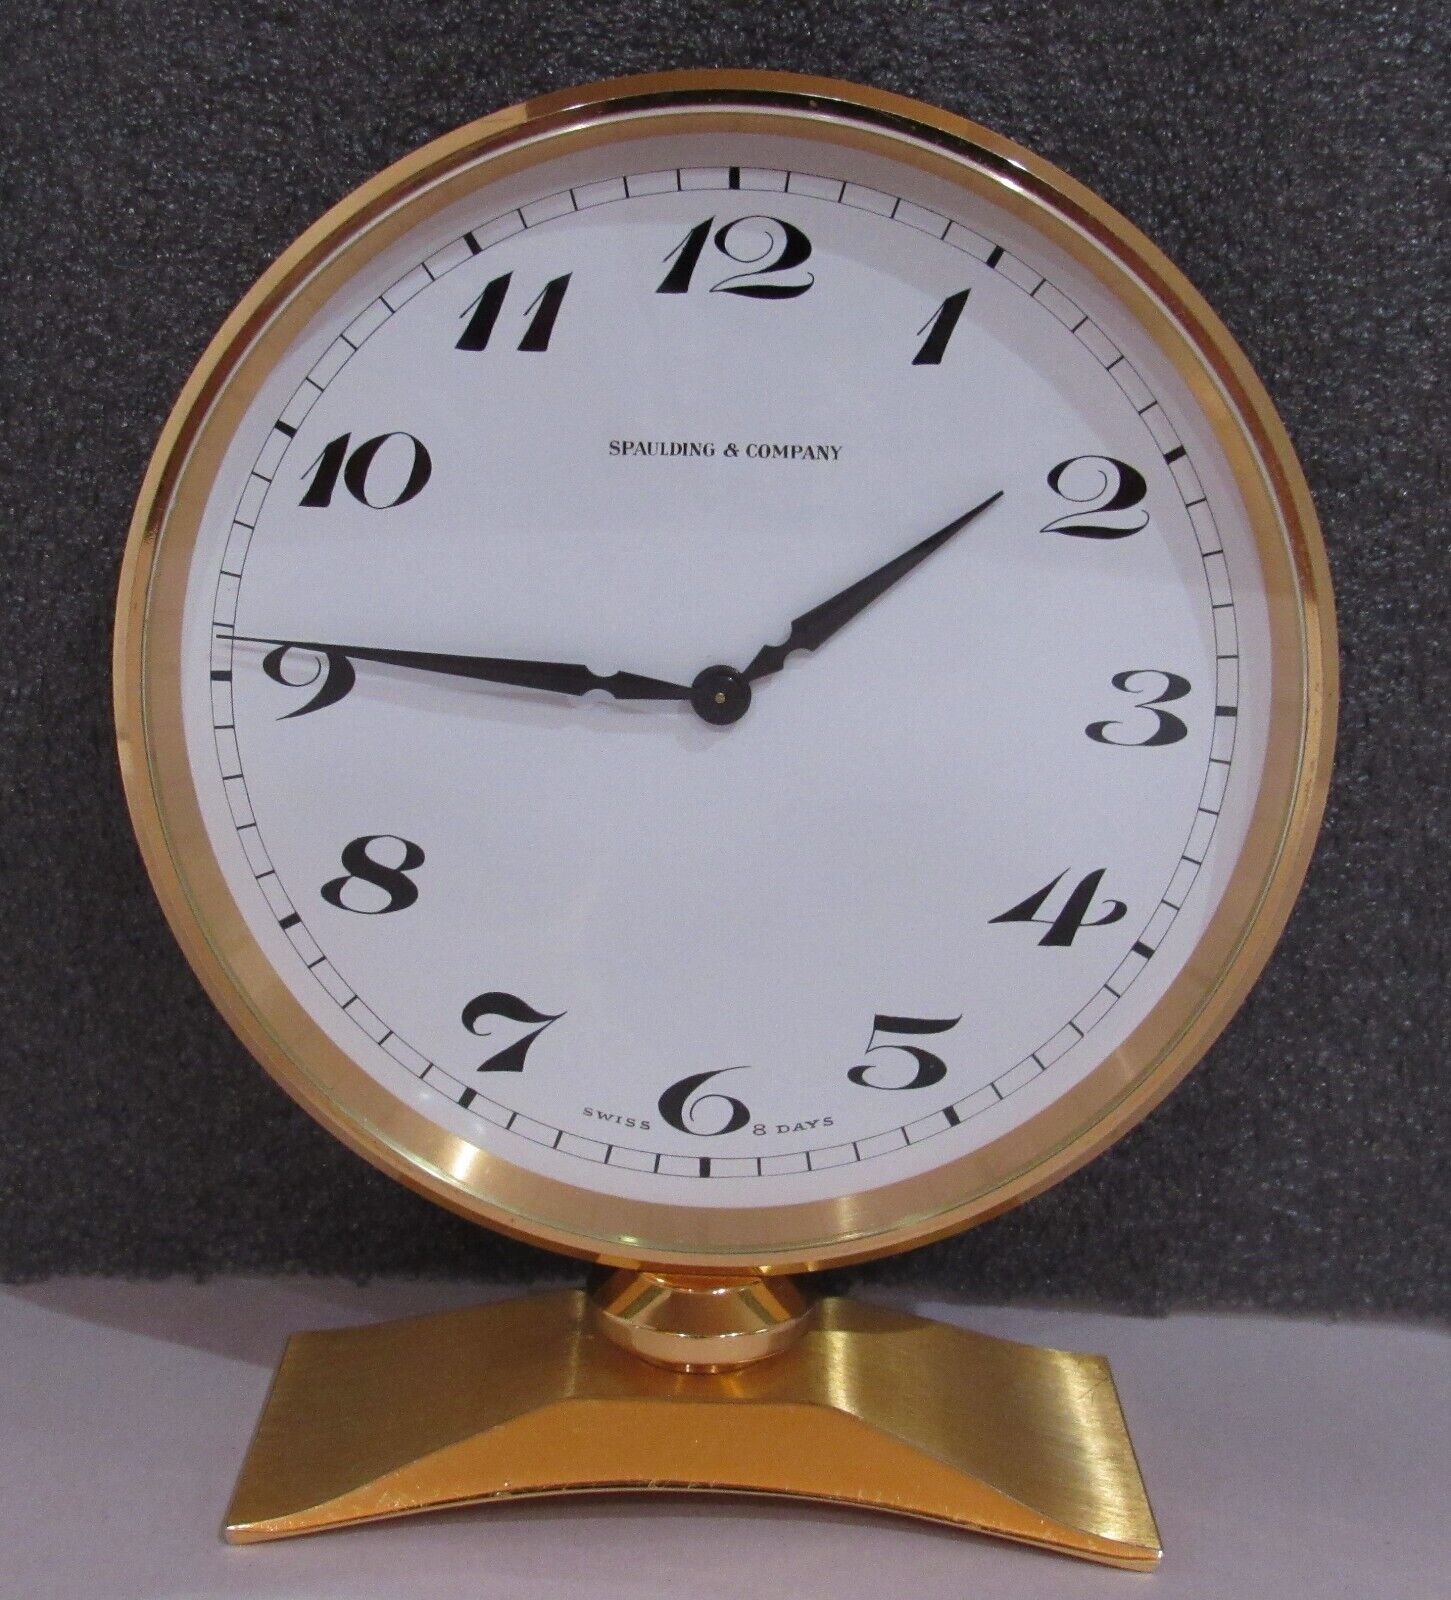 Imhof Swiss Made 8-Day Timepiece, 15 Jewels Spaulding & Company Desk Clock